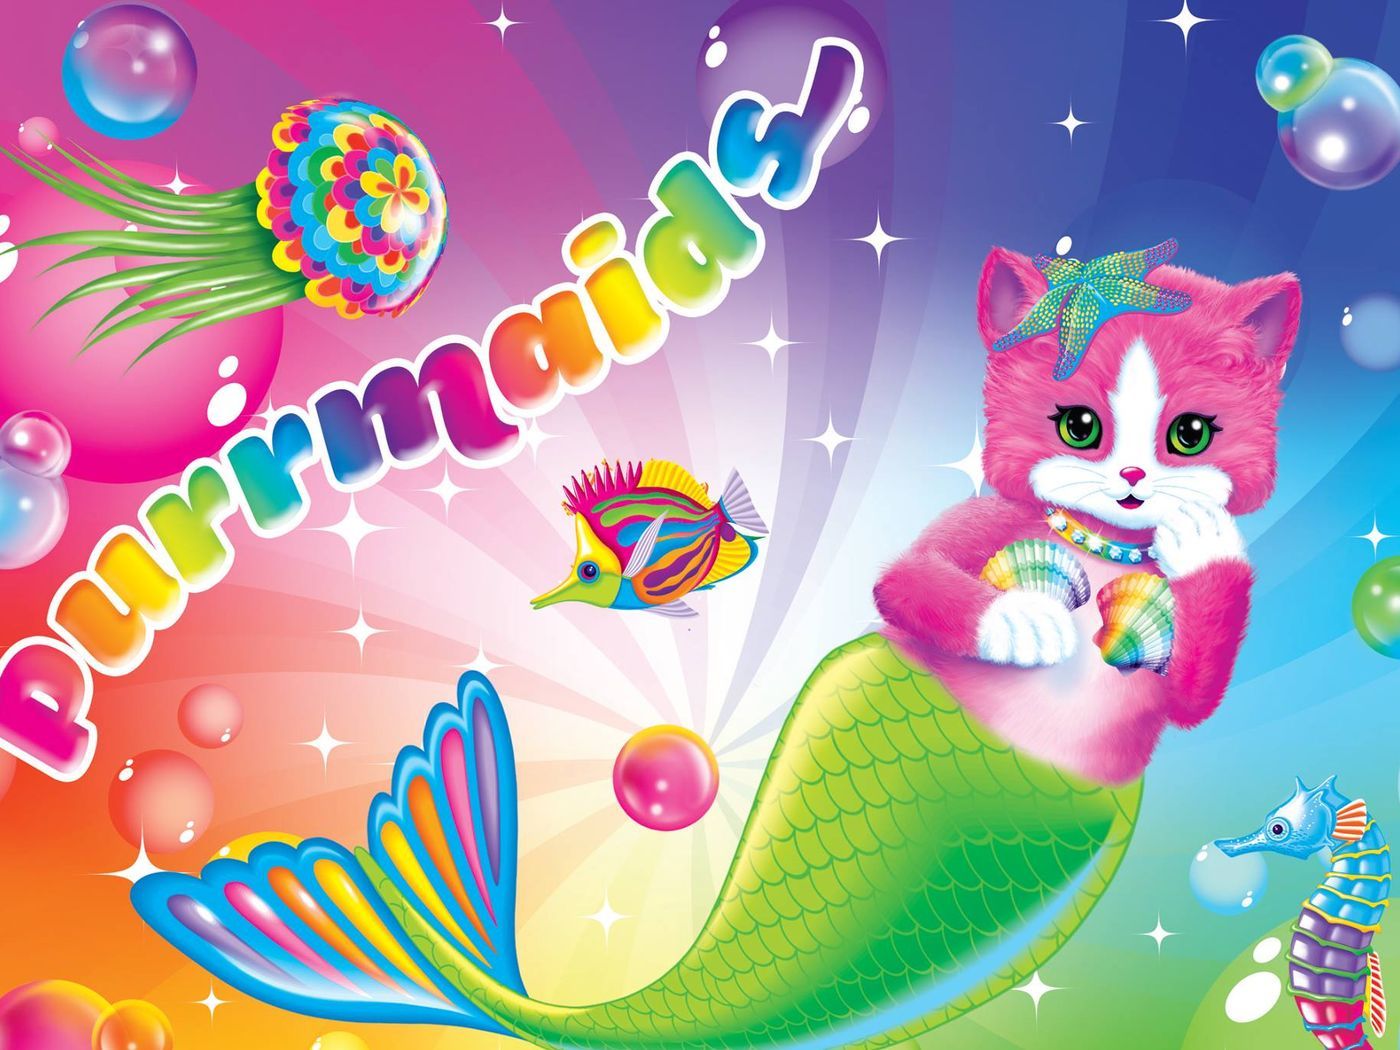 The official Lisa Frank Facebook page is an internet safe space